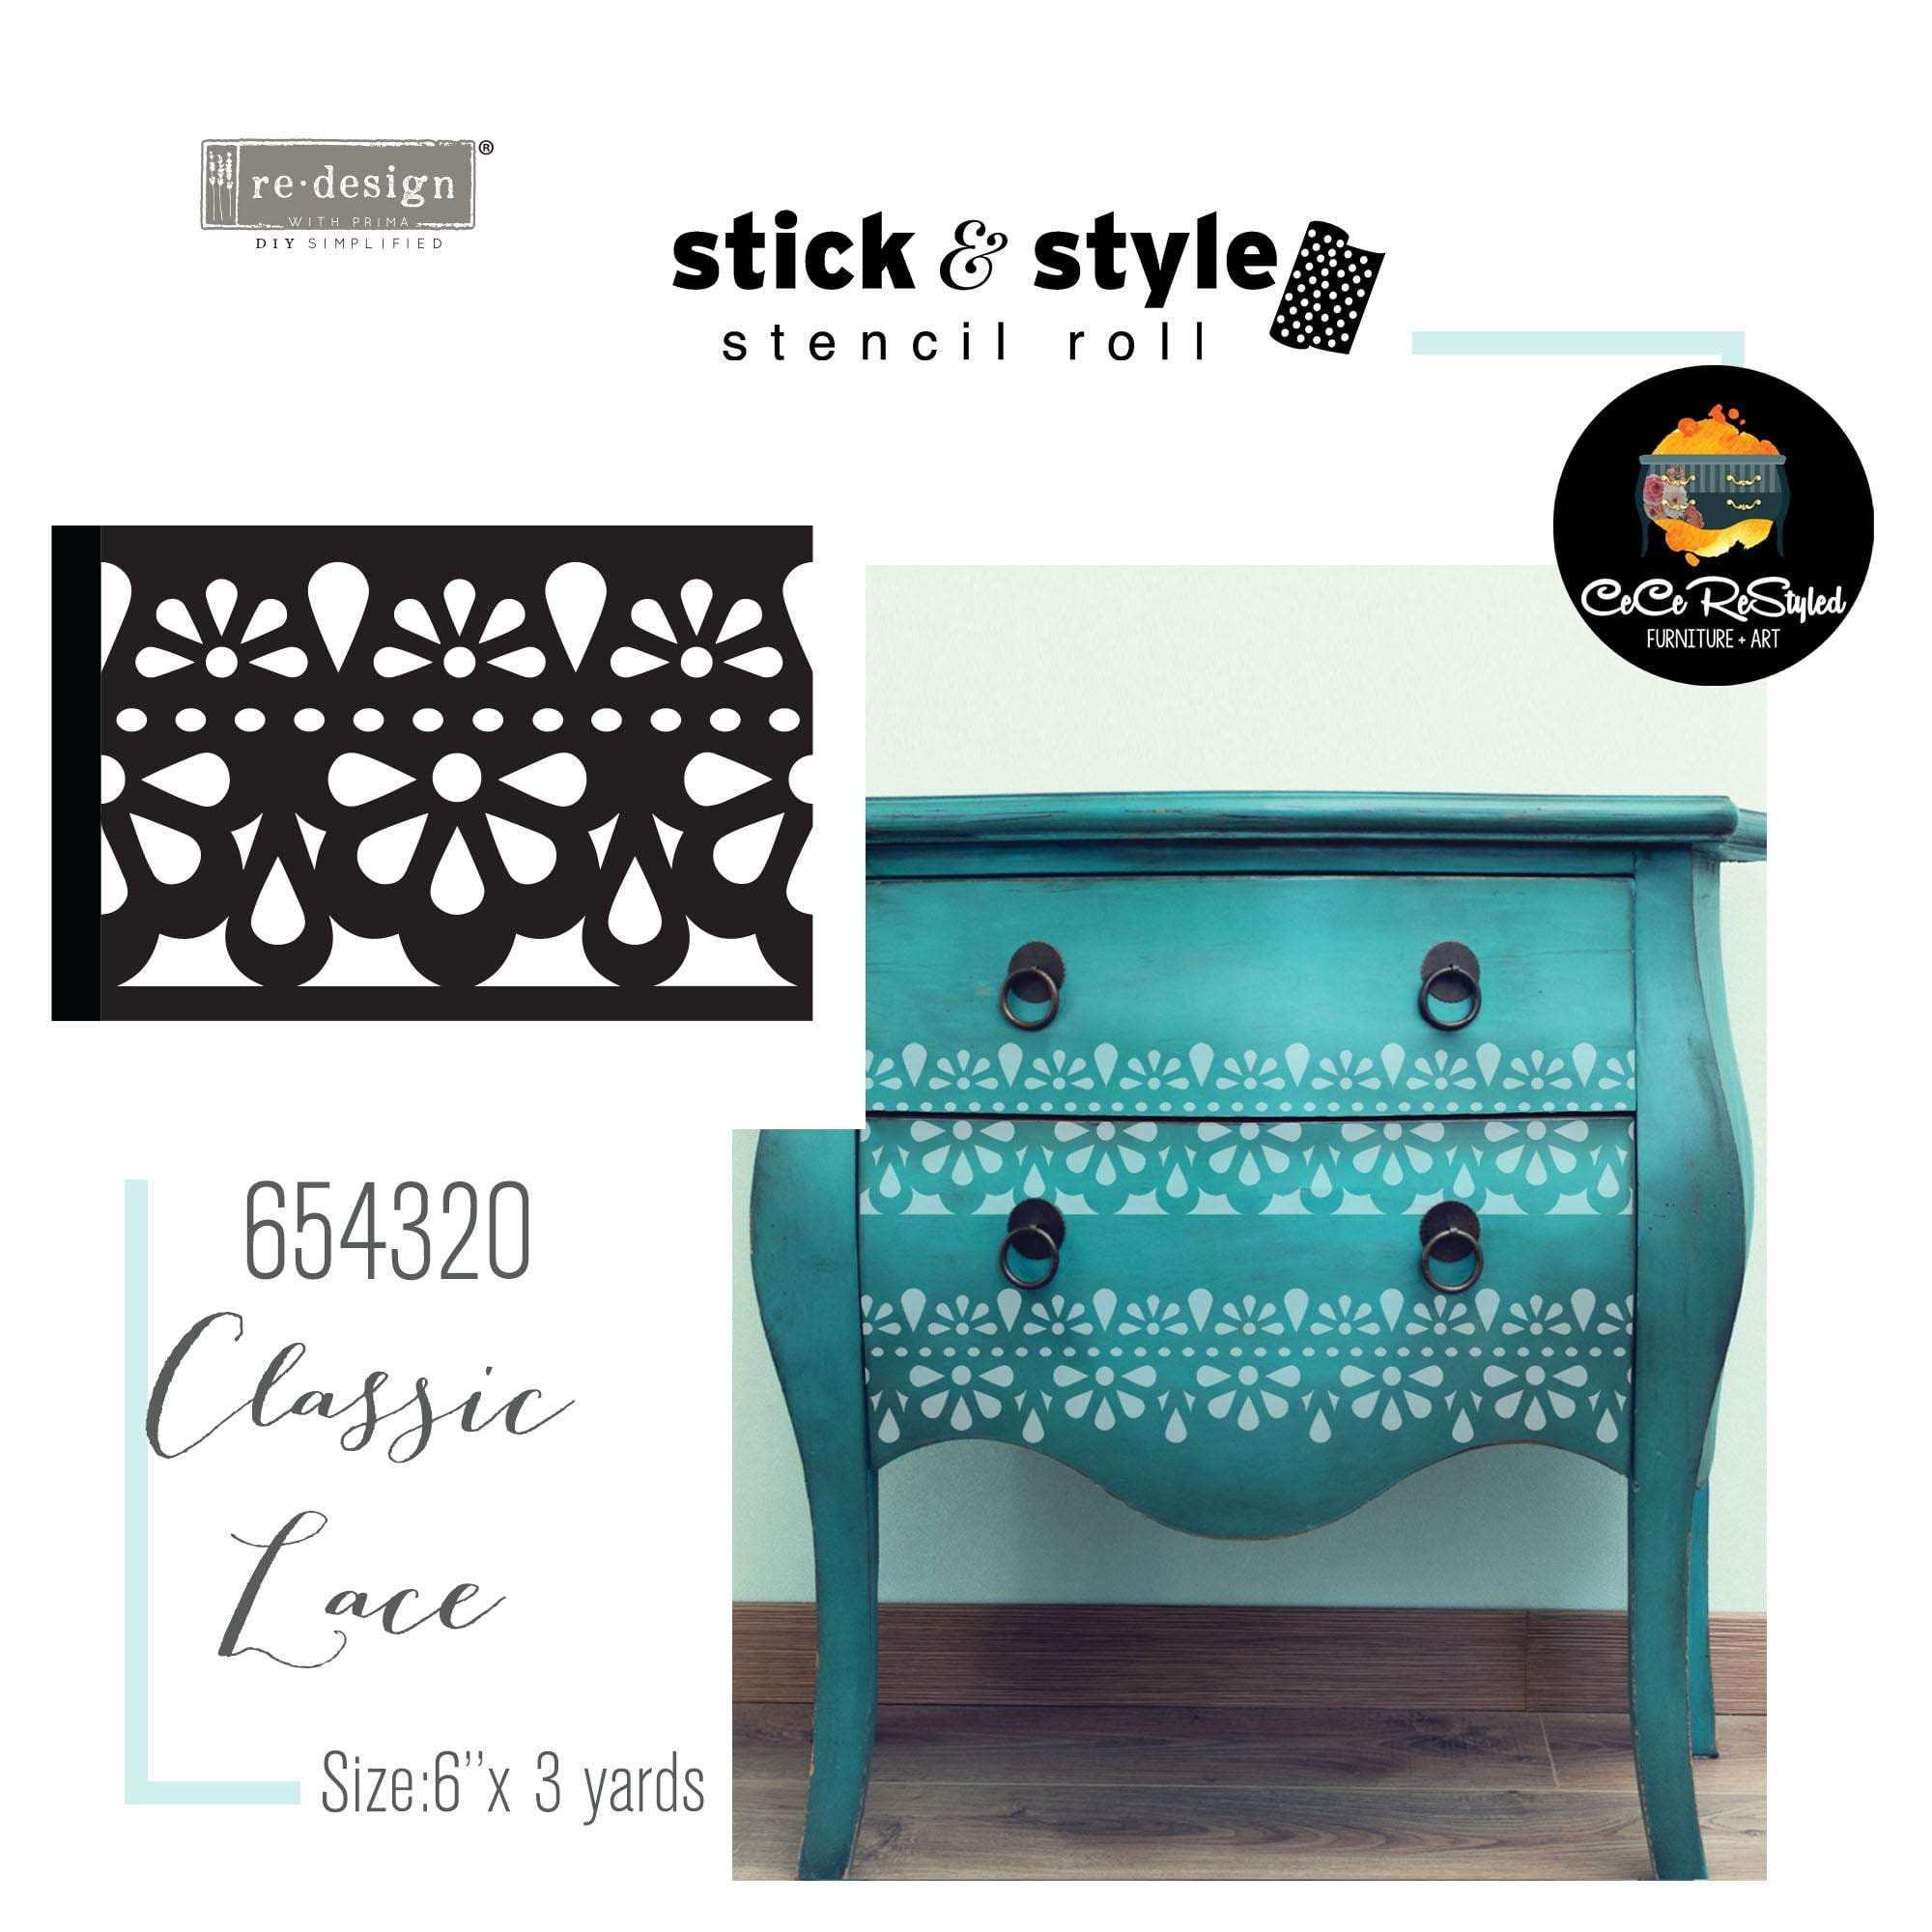 Classic Lace Stick & Style Reusable Adhesive Stencil from Redesign with Prima with Free Shipping